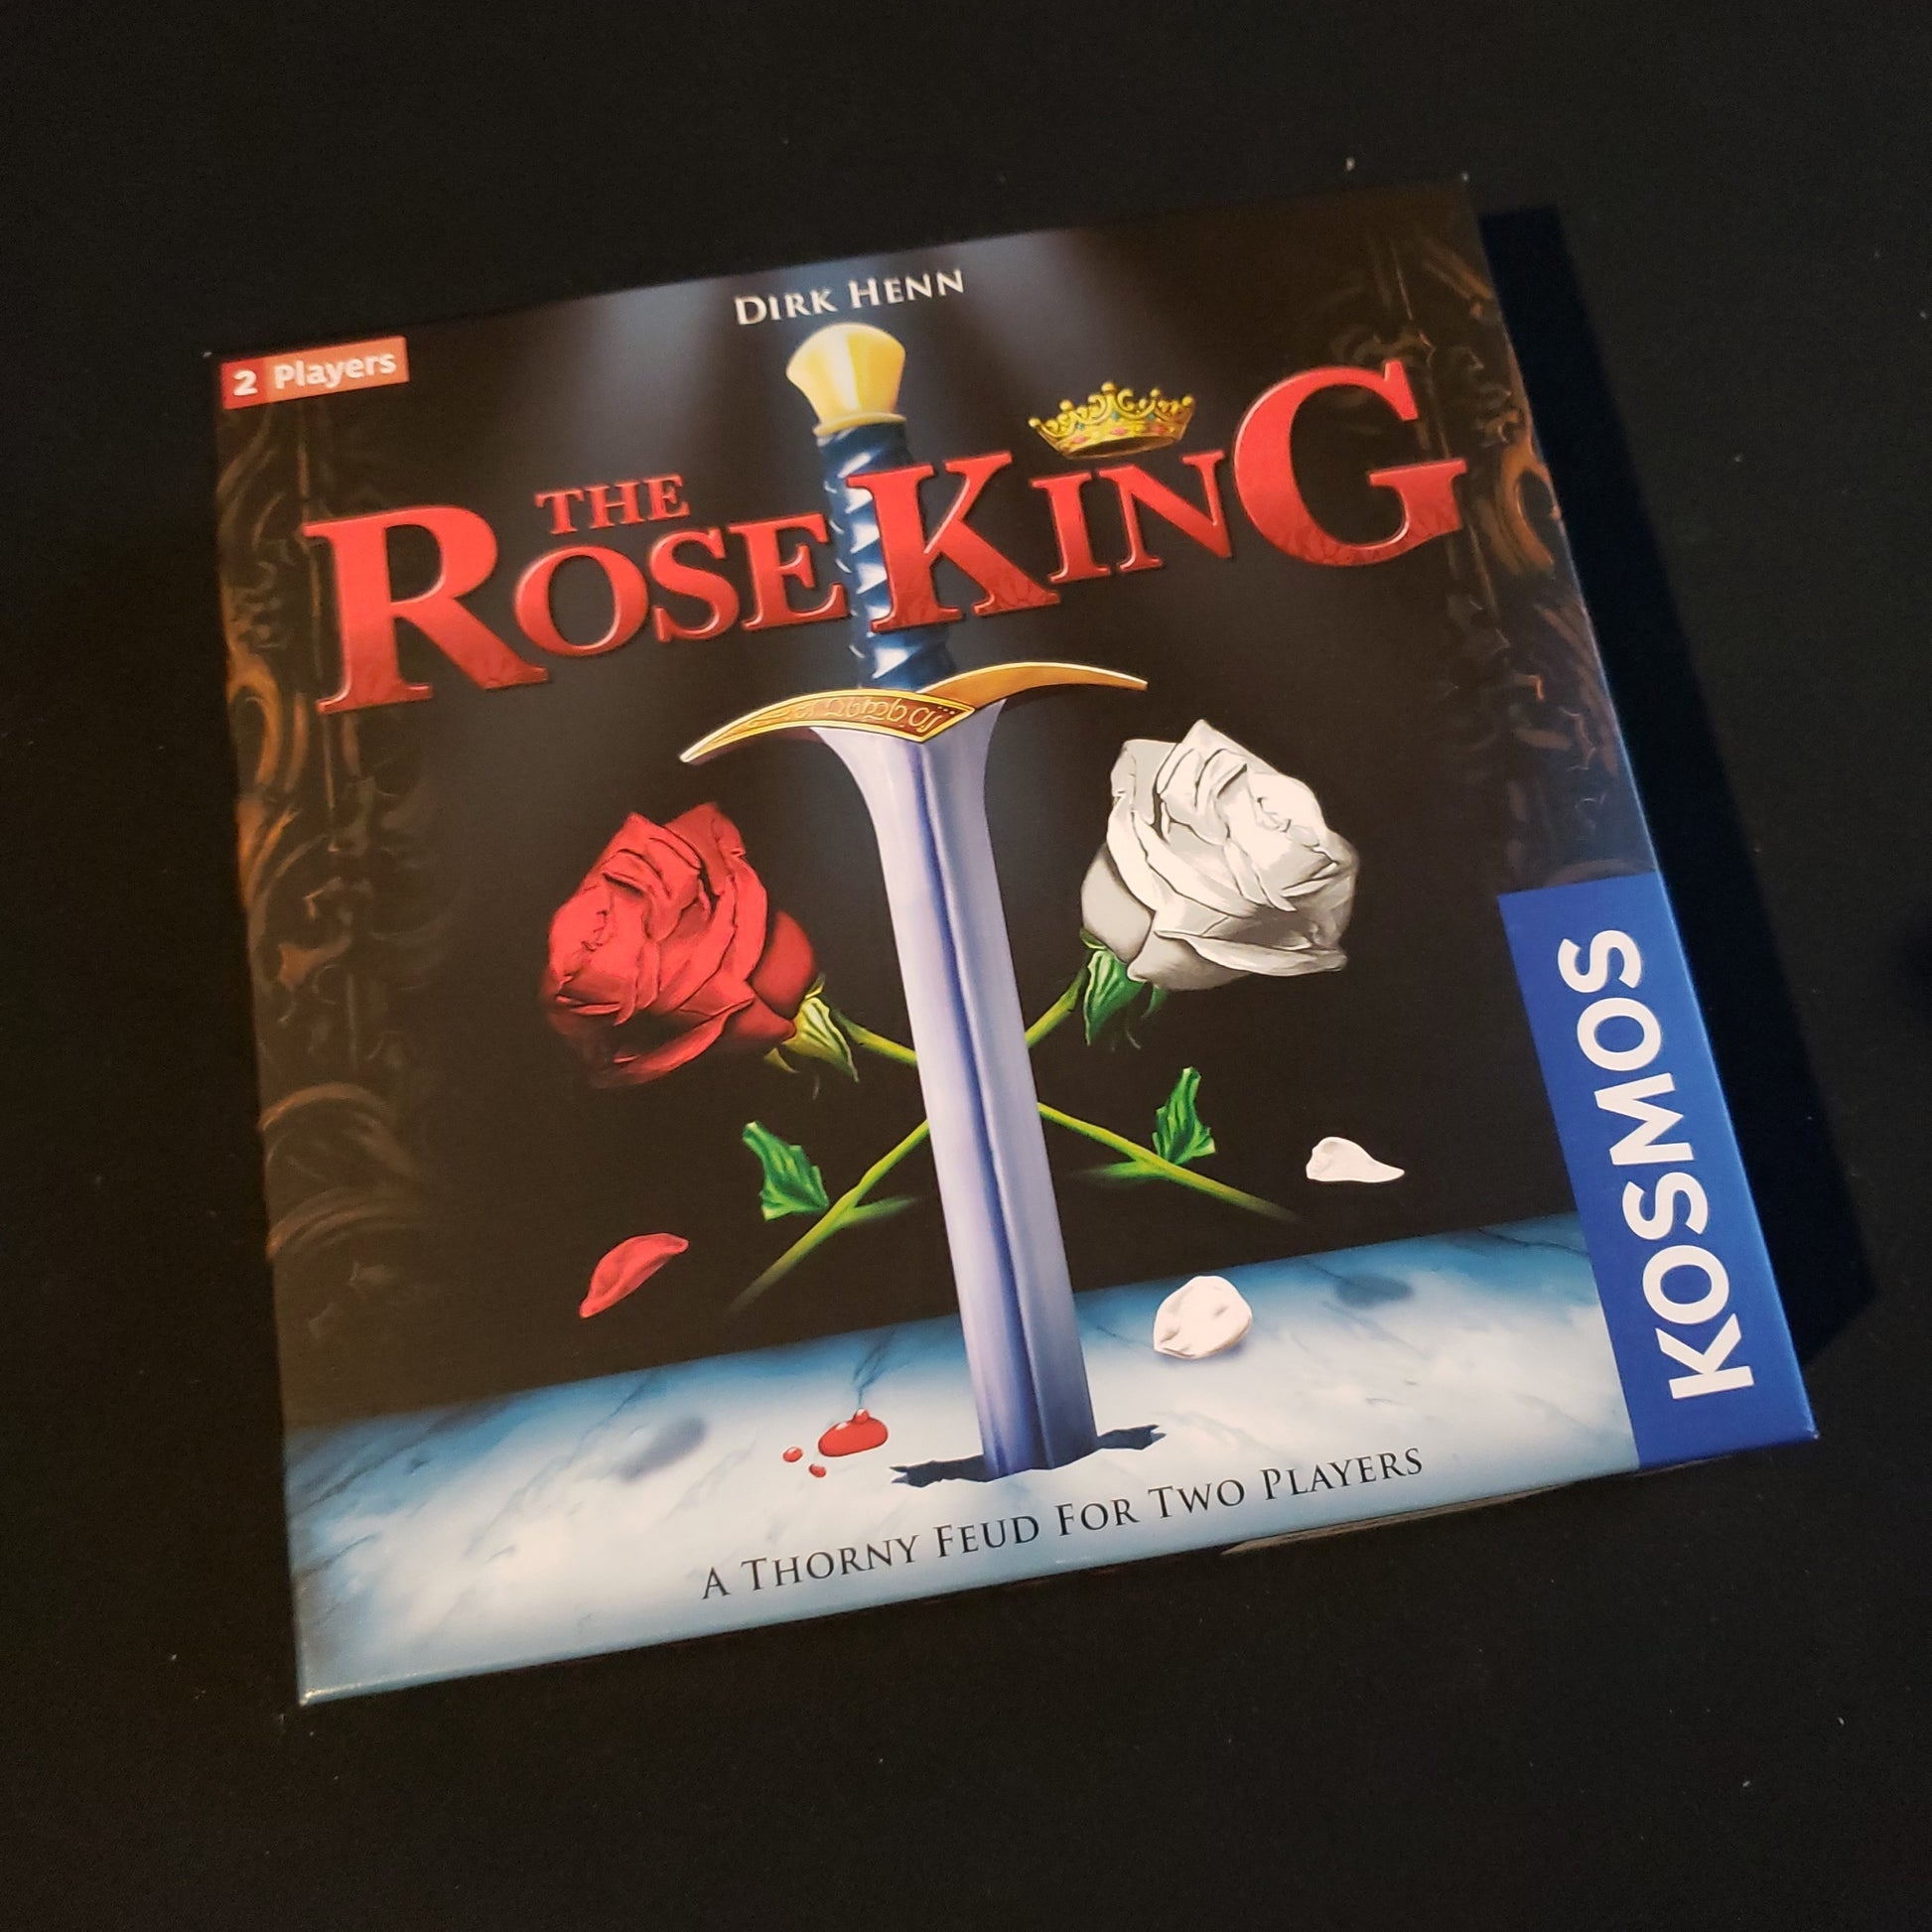 Image shows the front cover of the box of the Rose King board game